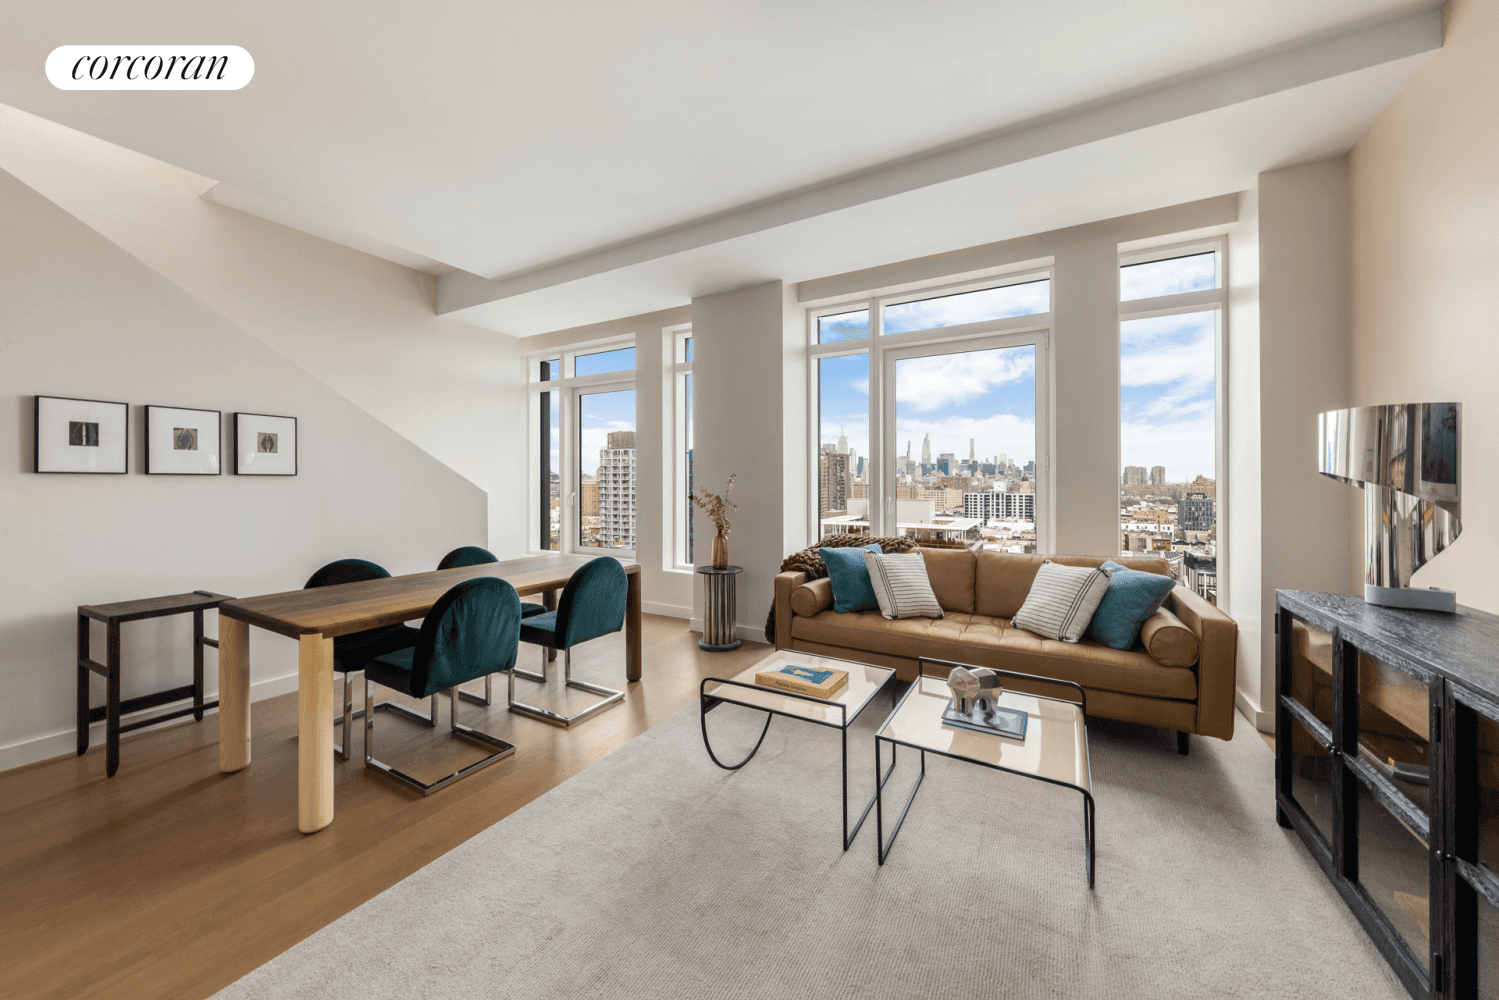 FINAL OPPORTUNITIES SPONSOR NOW OFFERING 24 MONTHS COMMON CHARGES UNTIL JULY 31 2023ULTIMATE 1BR PENTHOUSE WITH PRIVATE ROOF TERRACE AND SPECTACULAR VIEWS OF MIDTOWNSitting at the heart of this authentic ...